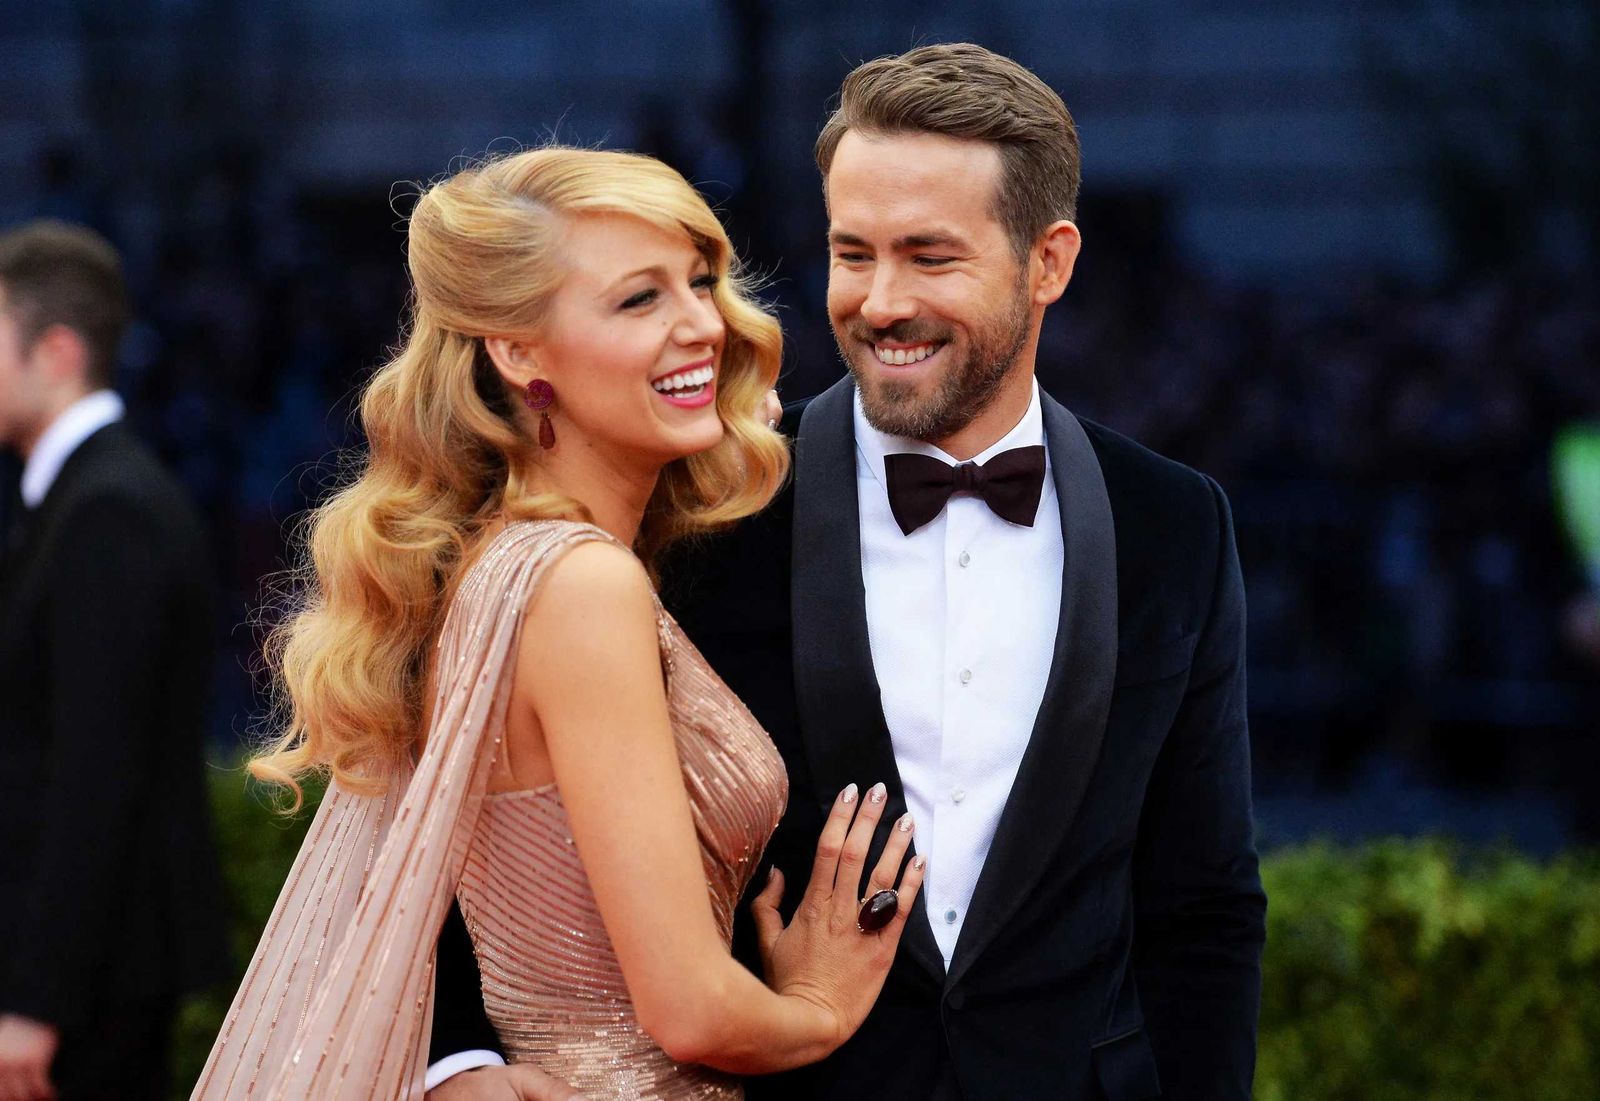 Ryan Reynolds and Blake Lively (Source: Glamour))